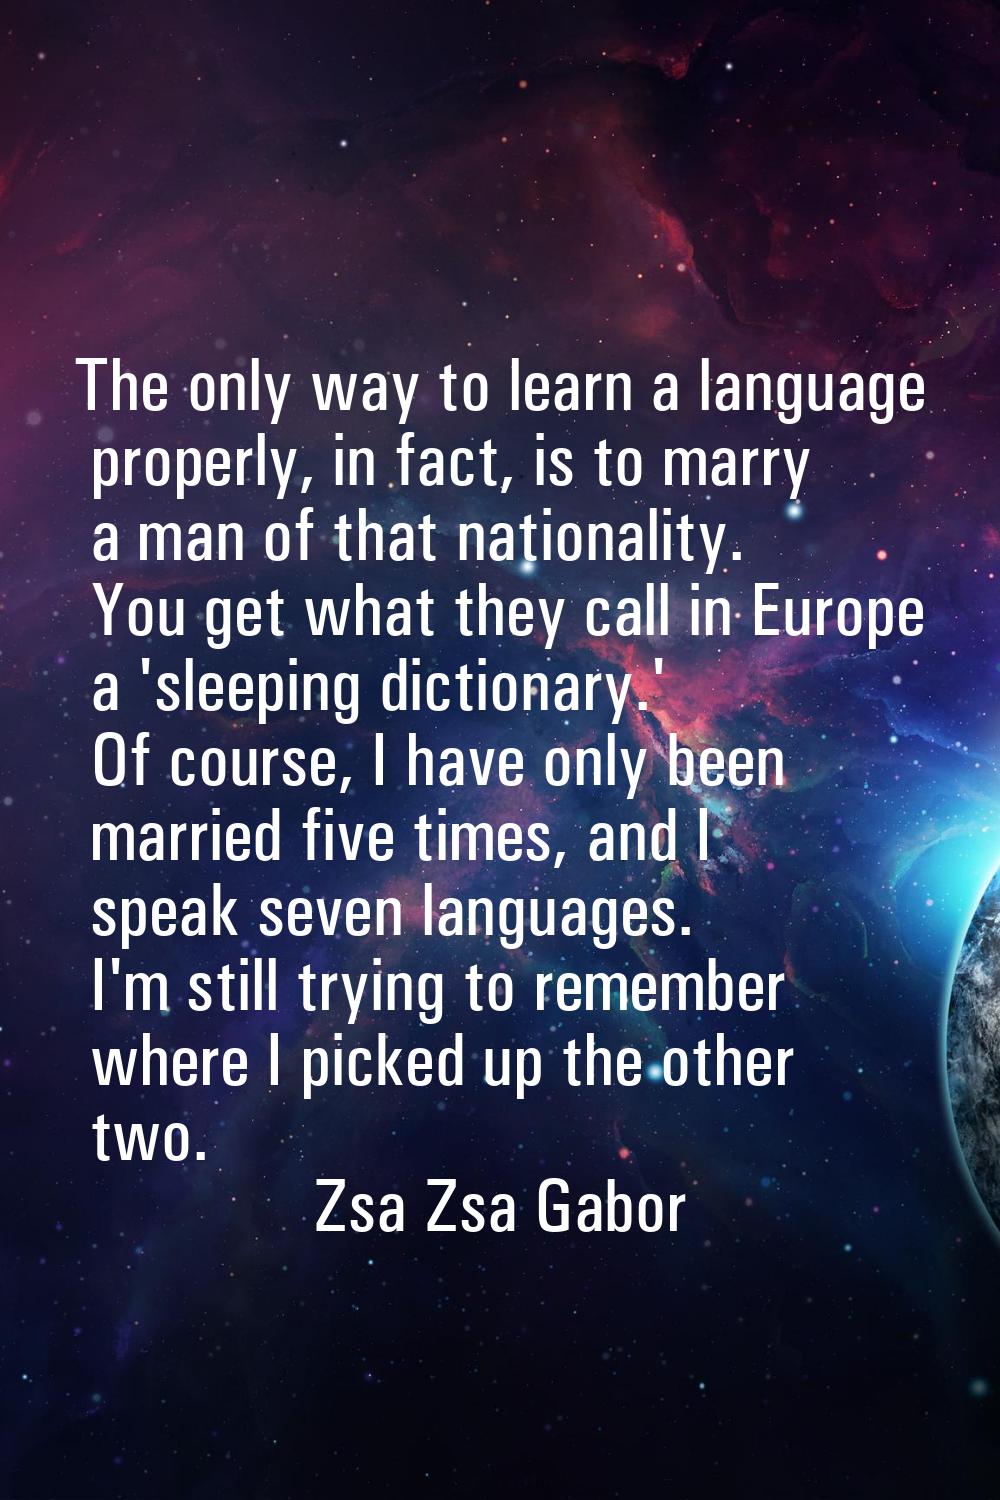 The only way to learn a language properly, in fact, is to marry a man of that nationality. You get 